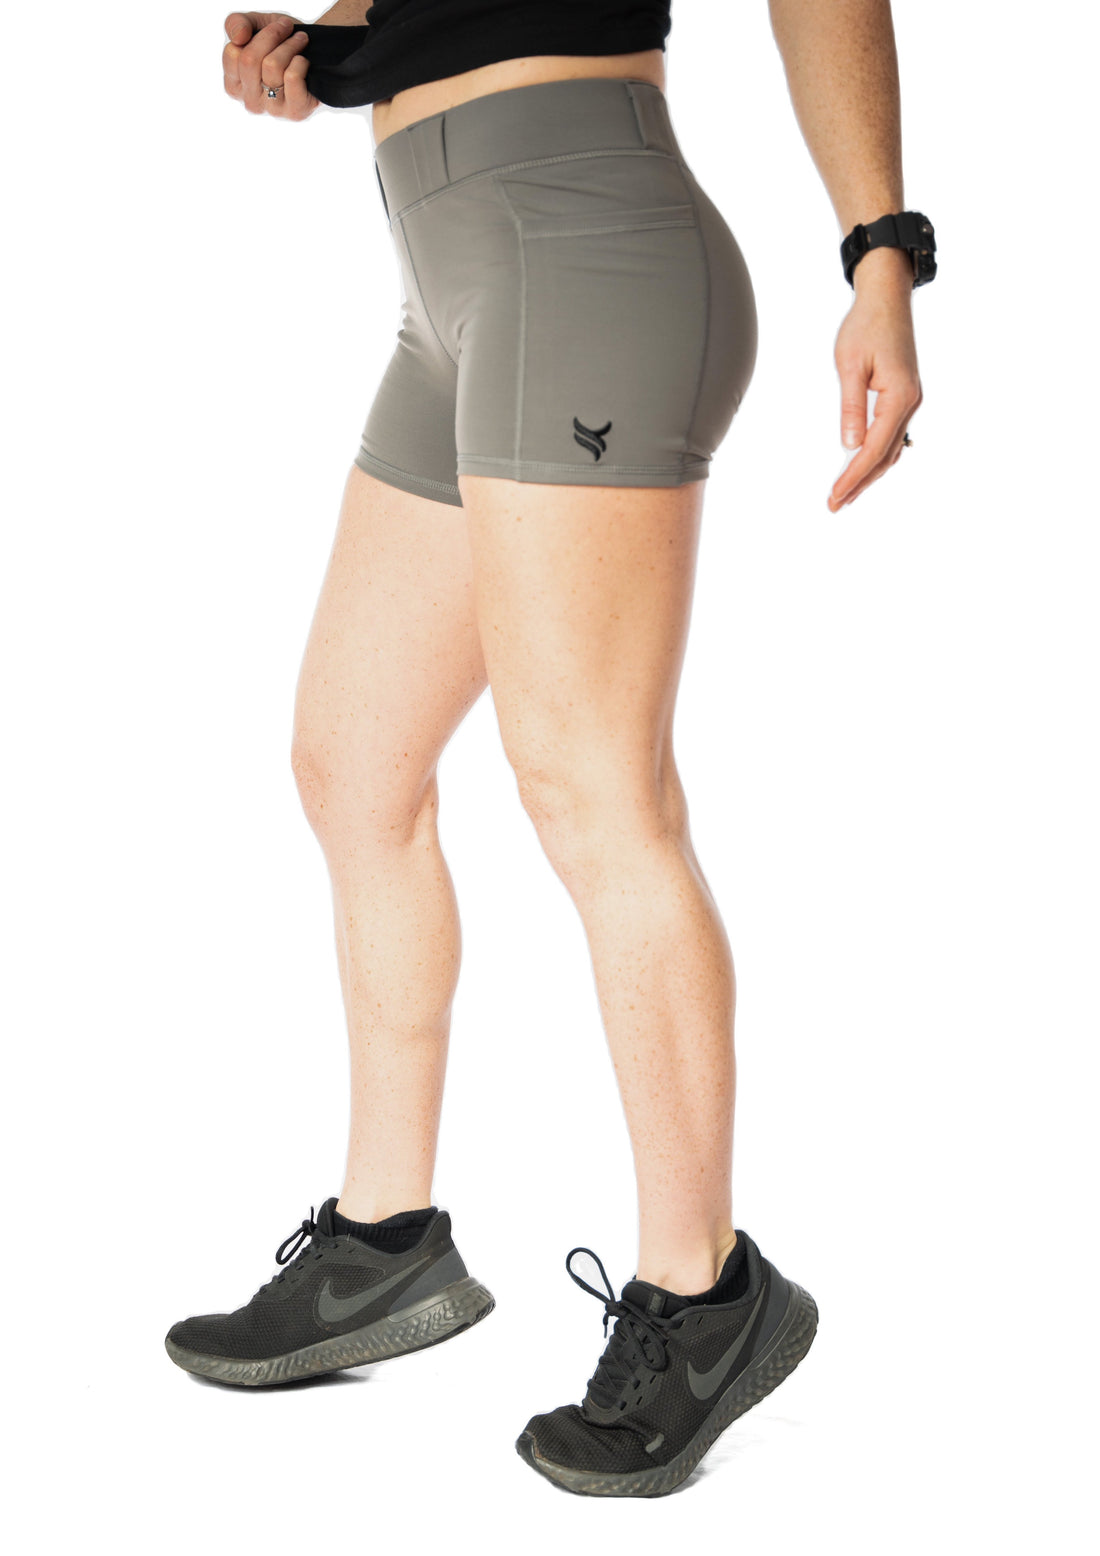 Women's Compression Carry Shorts - Gray